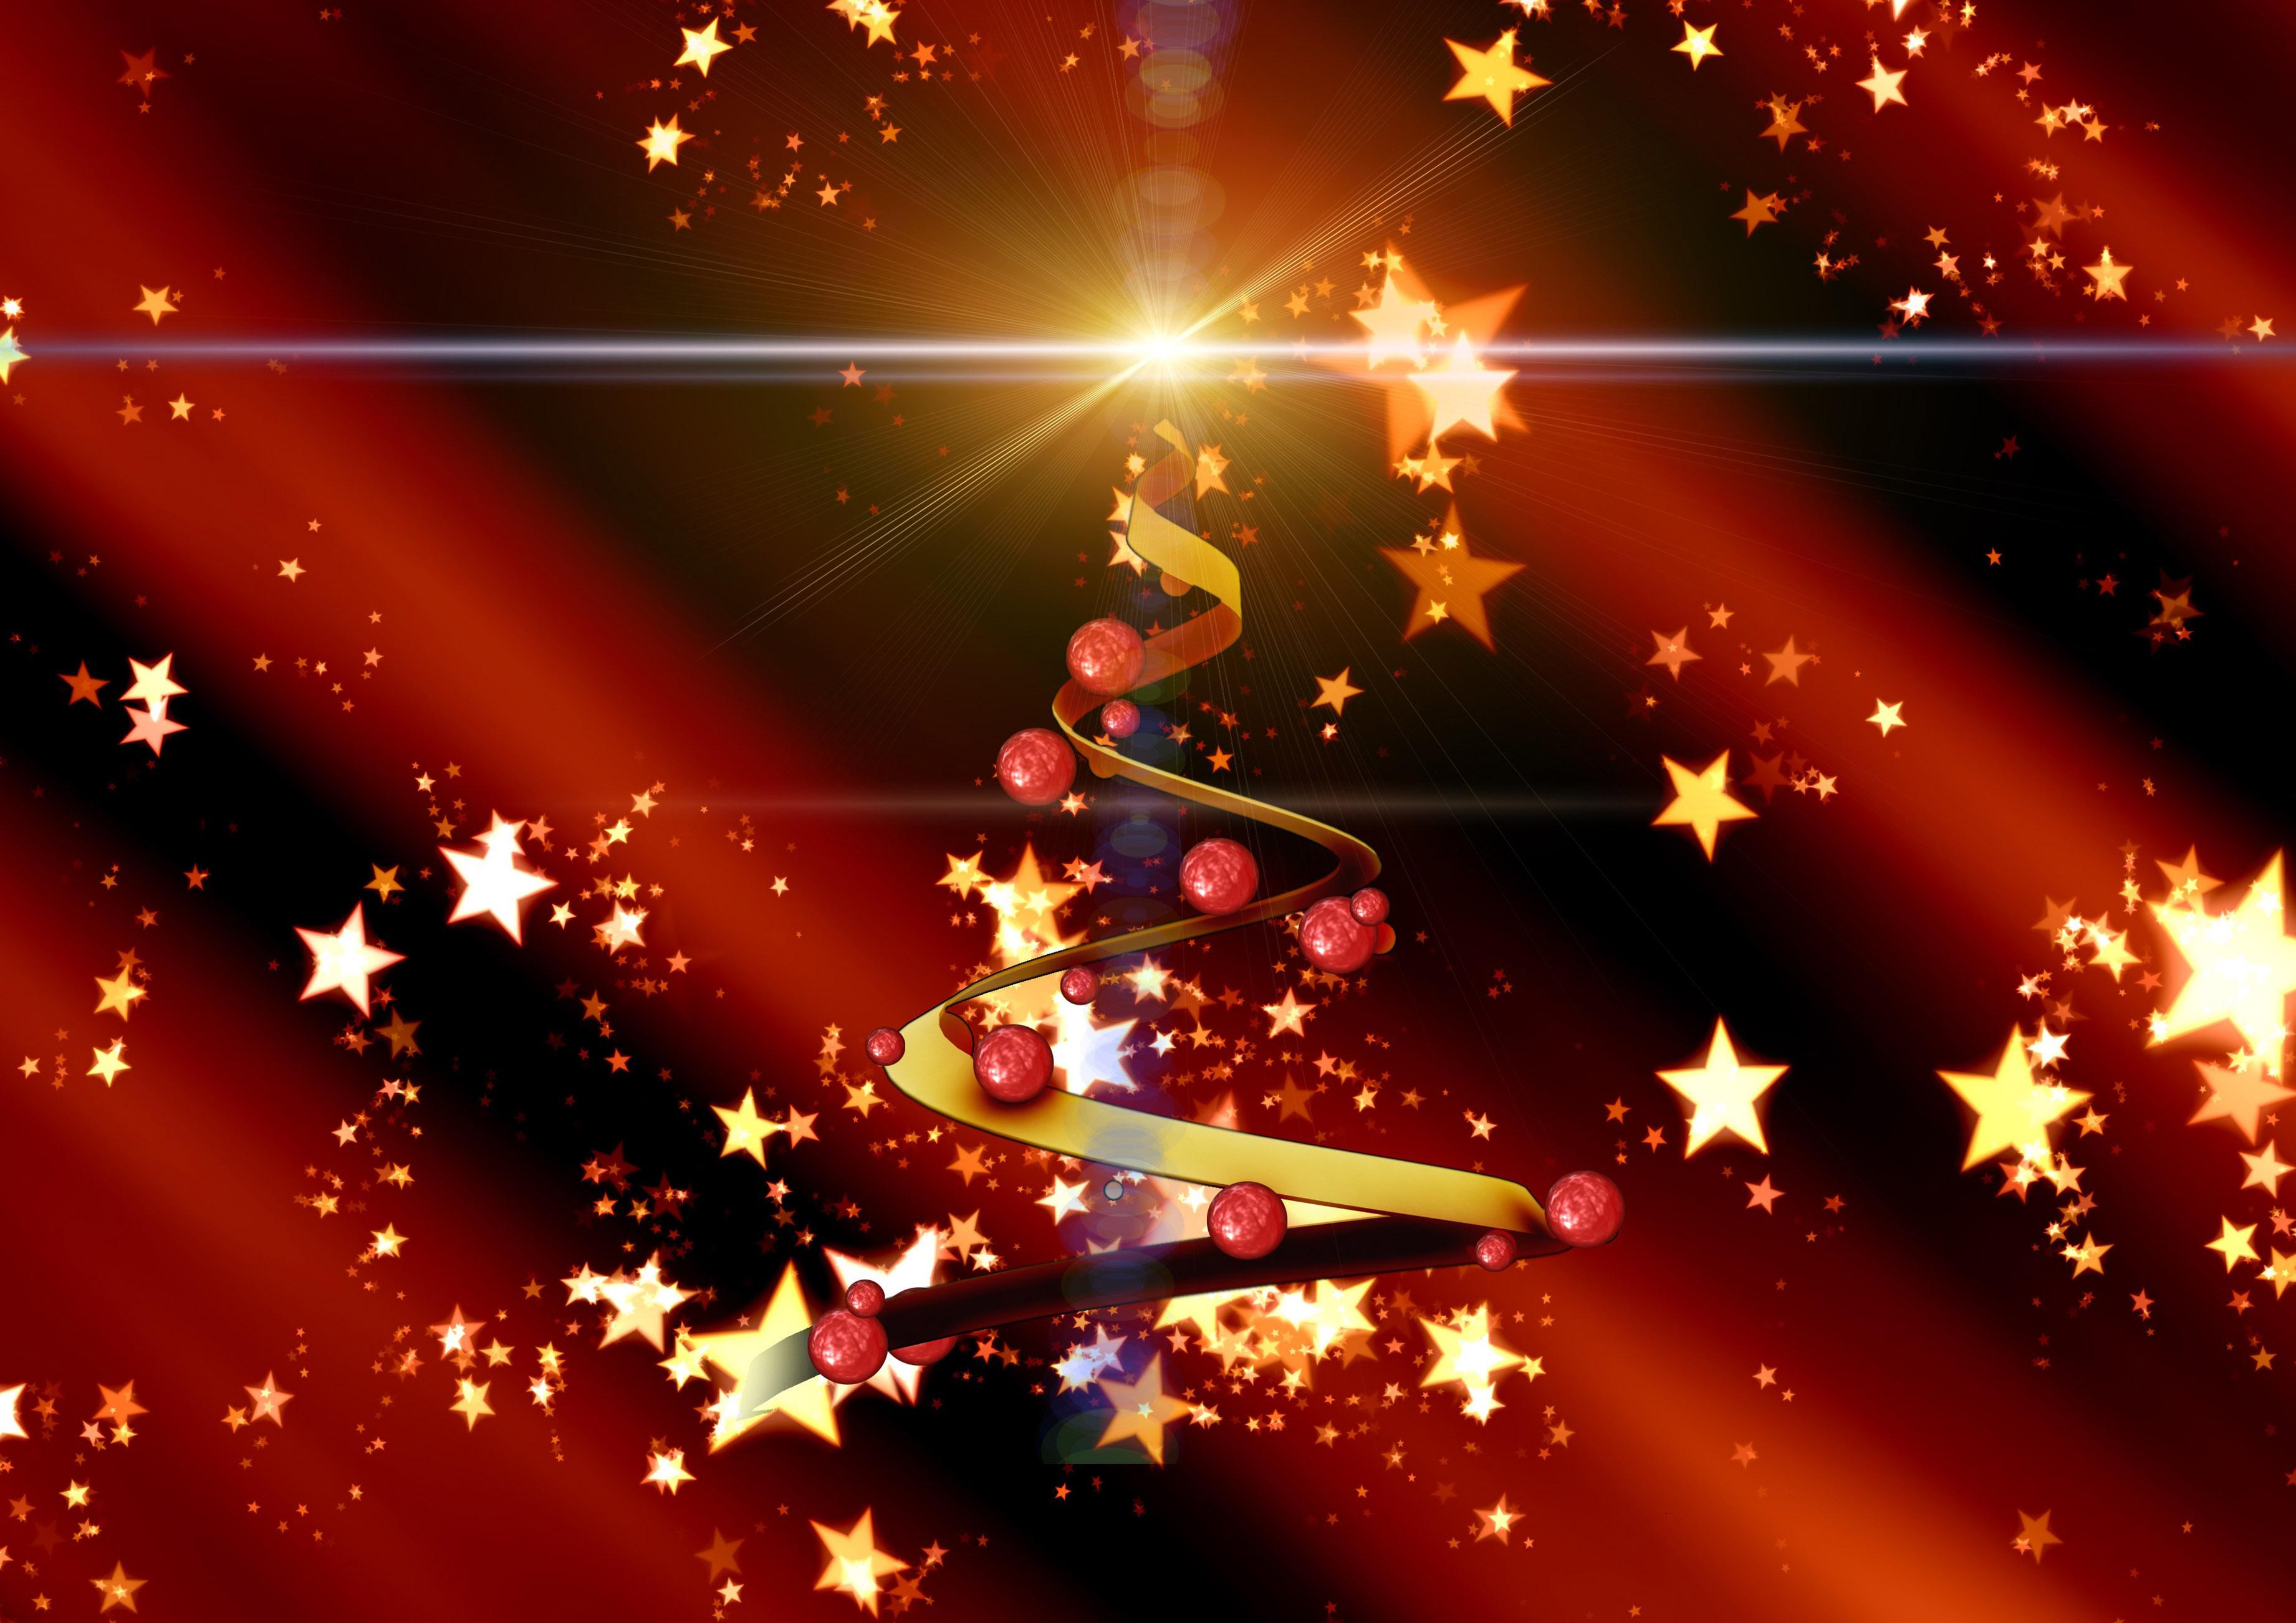 Christmas Tree Related Wallpaper, Background Image